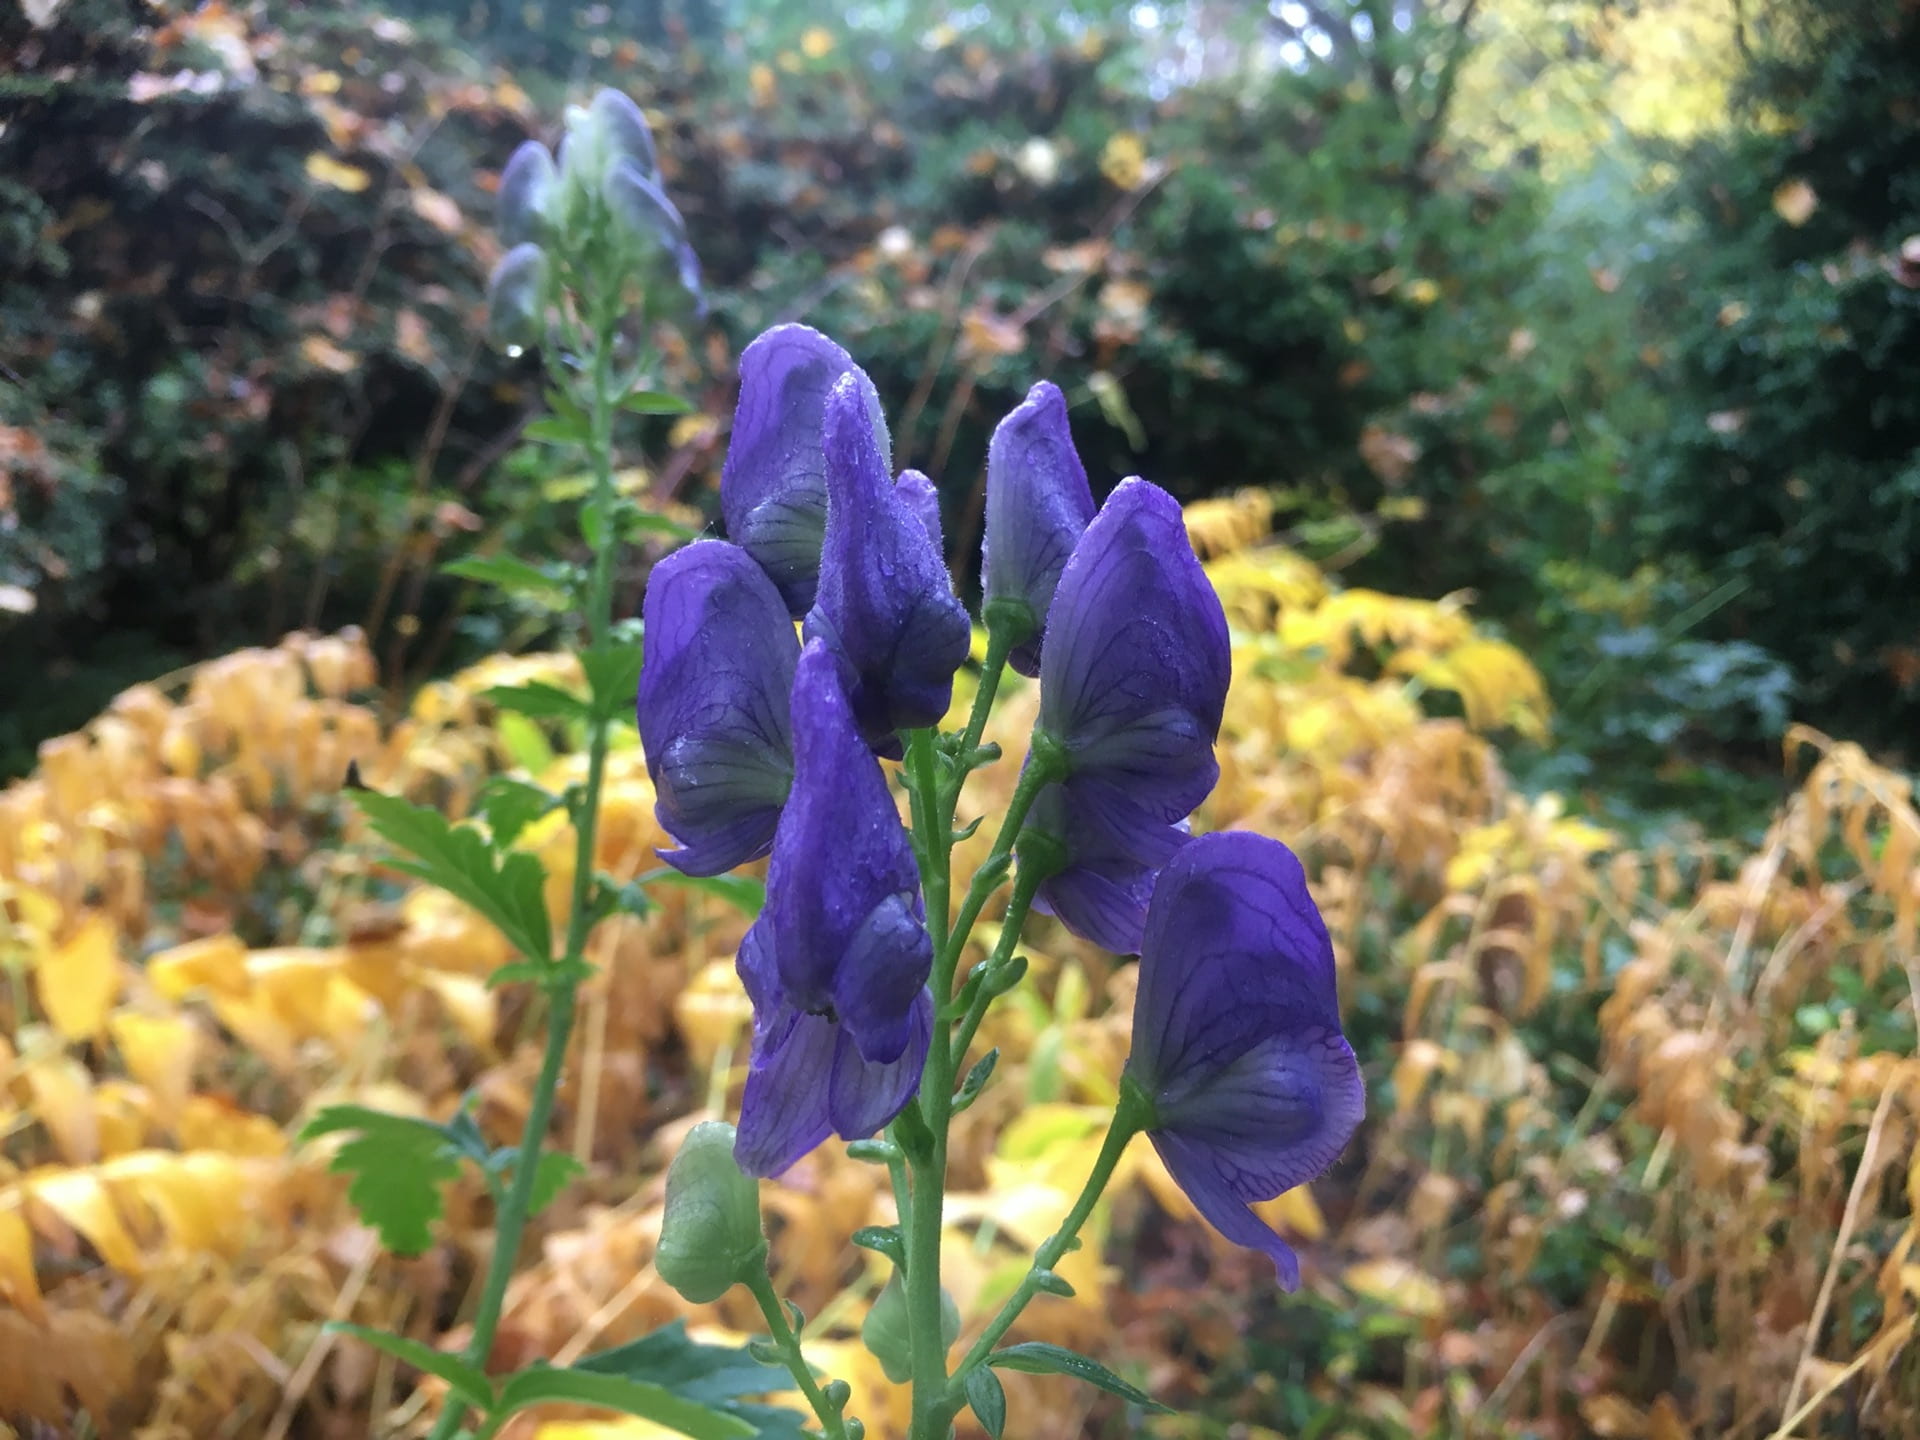 The violet hooded flowers of Aconitum carmichaelii 'Arendsii' stand out amongst the yellow of autumn.